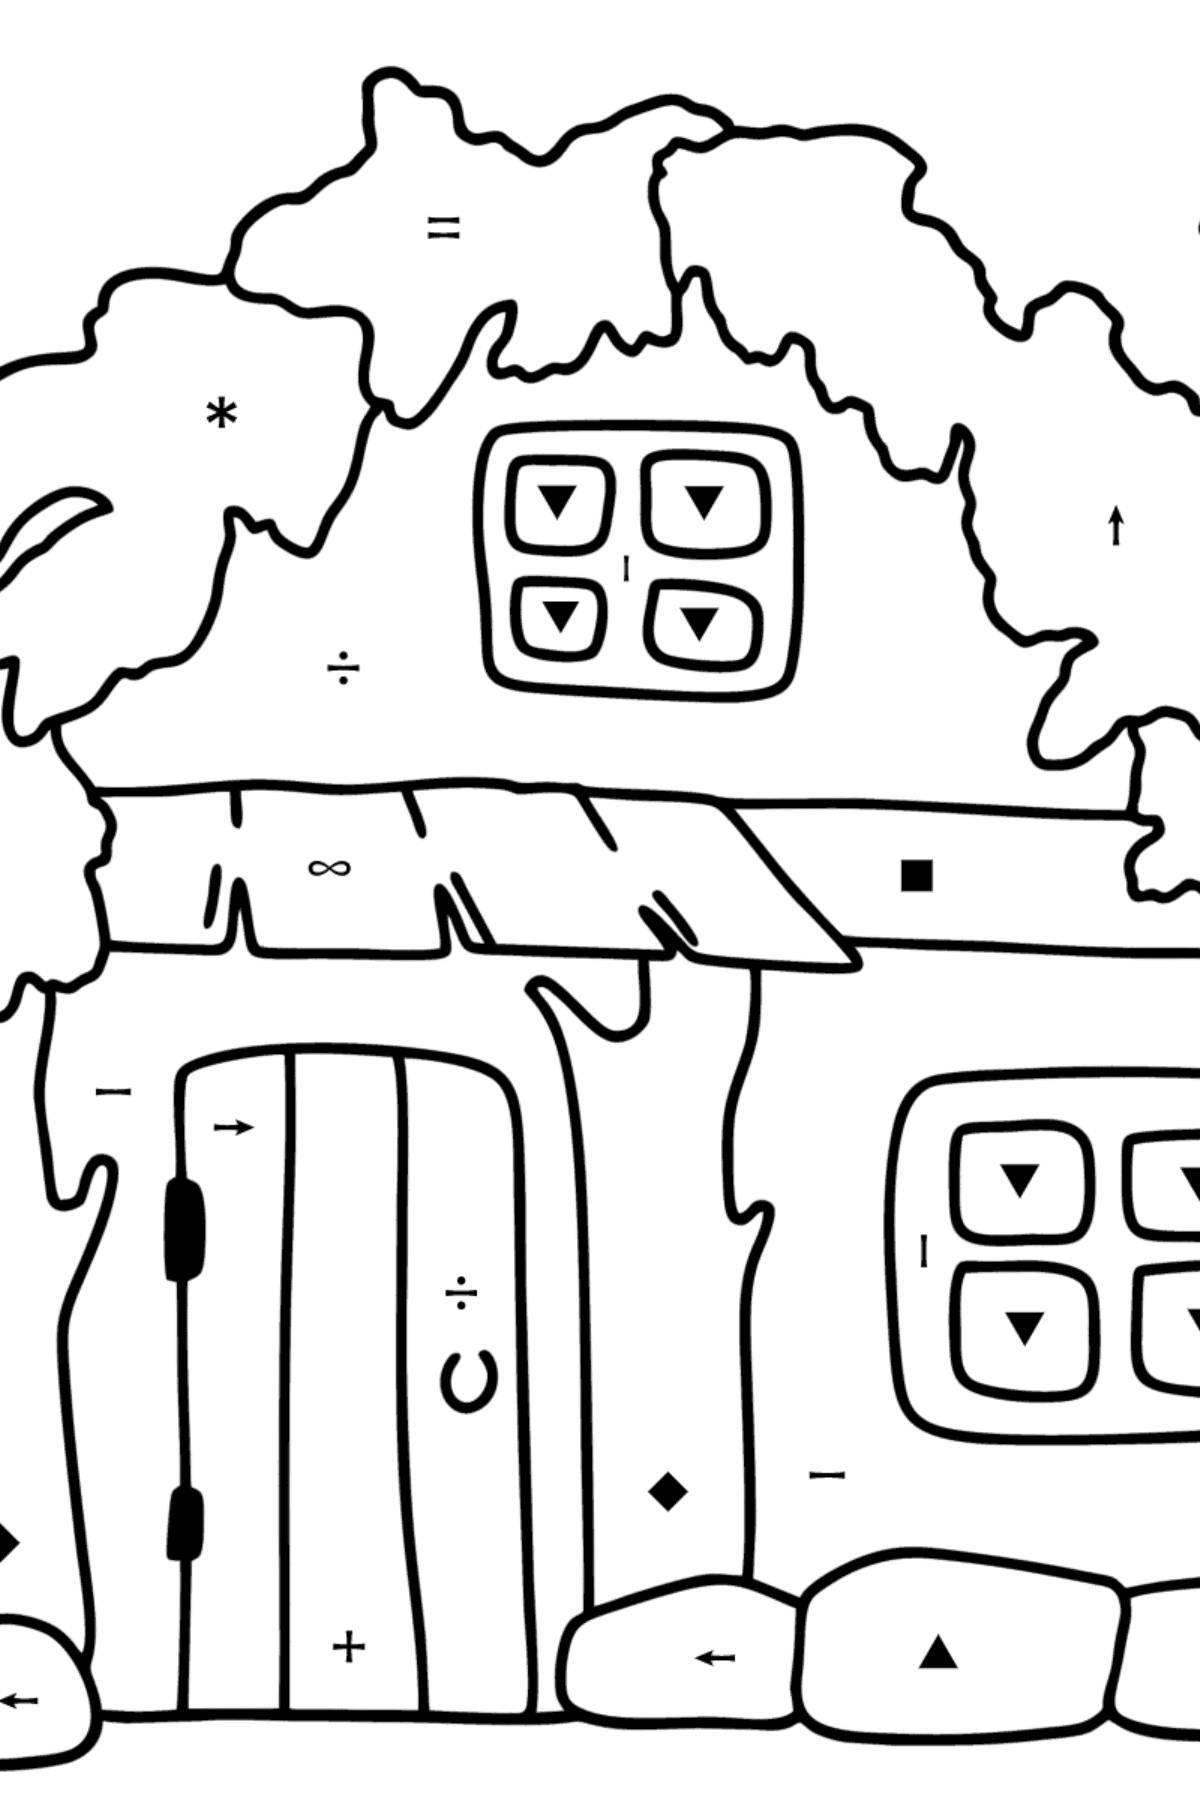 Exciting hut coloring book for kids